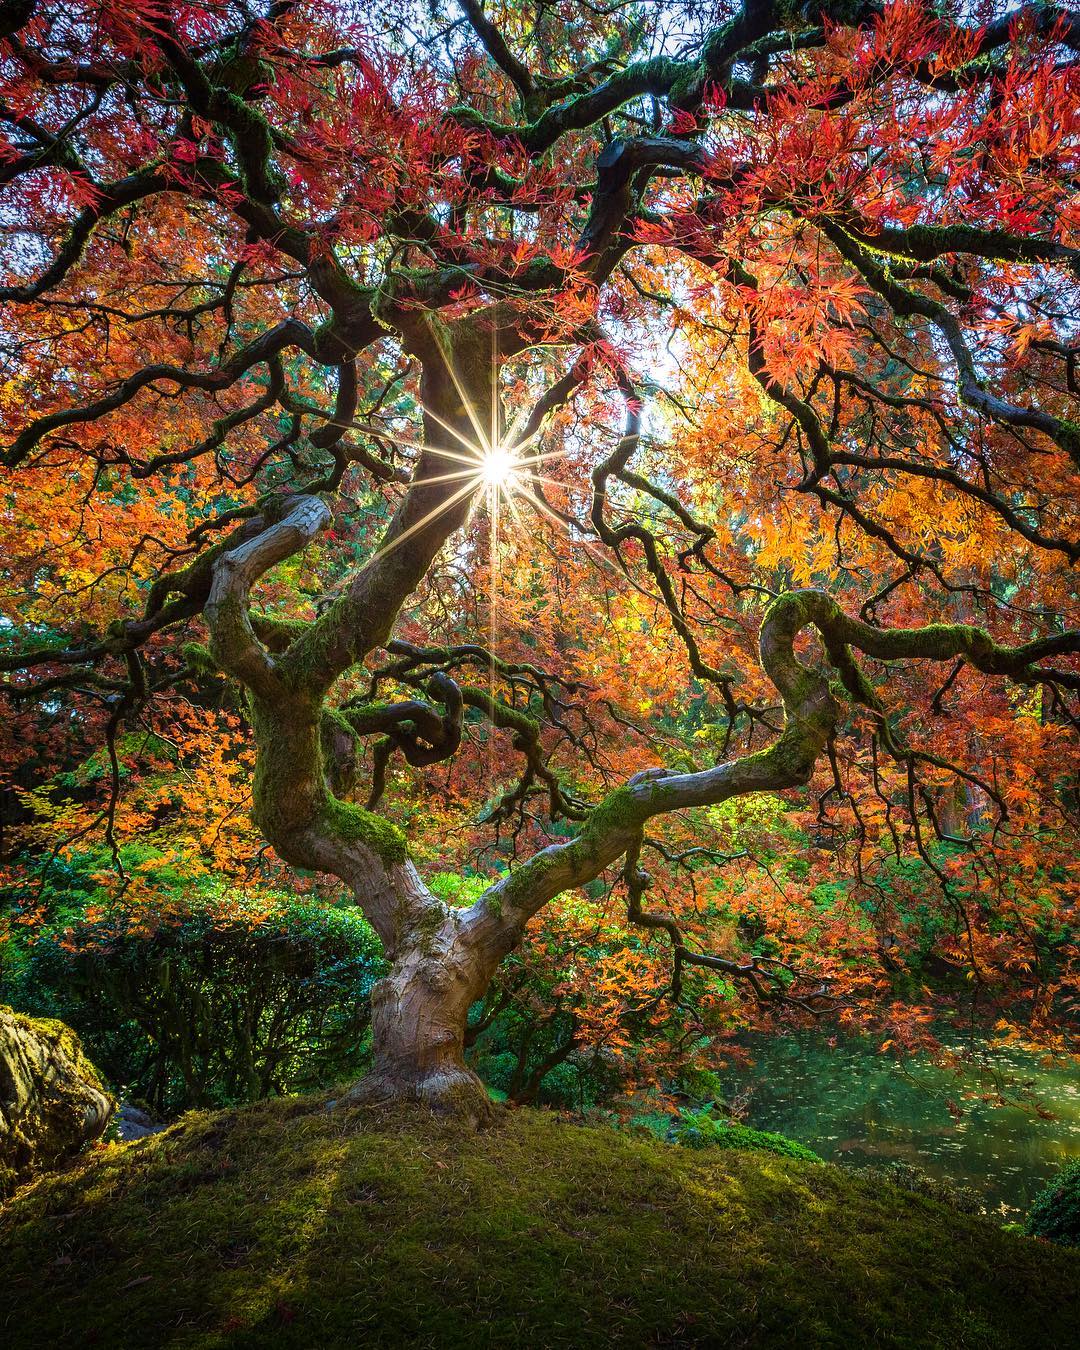 This beautiful tree in Portland Japanese garden